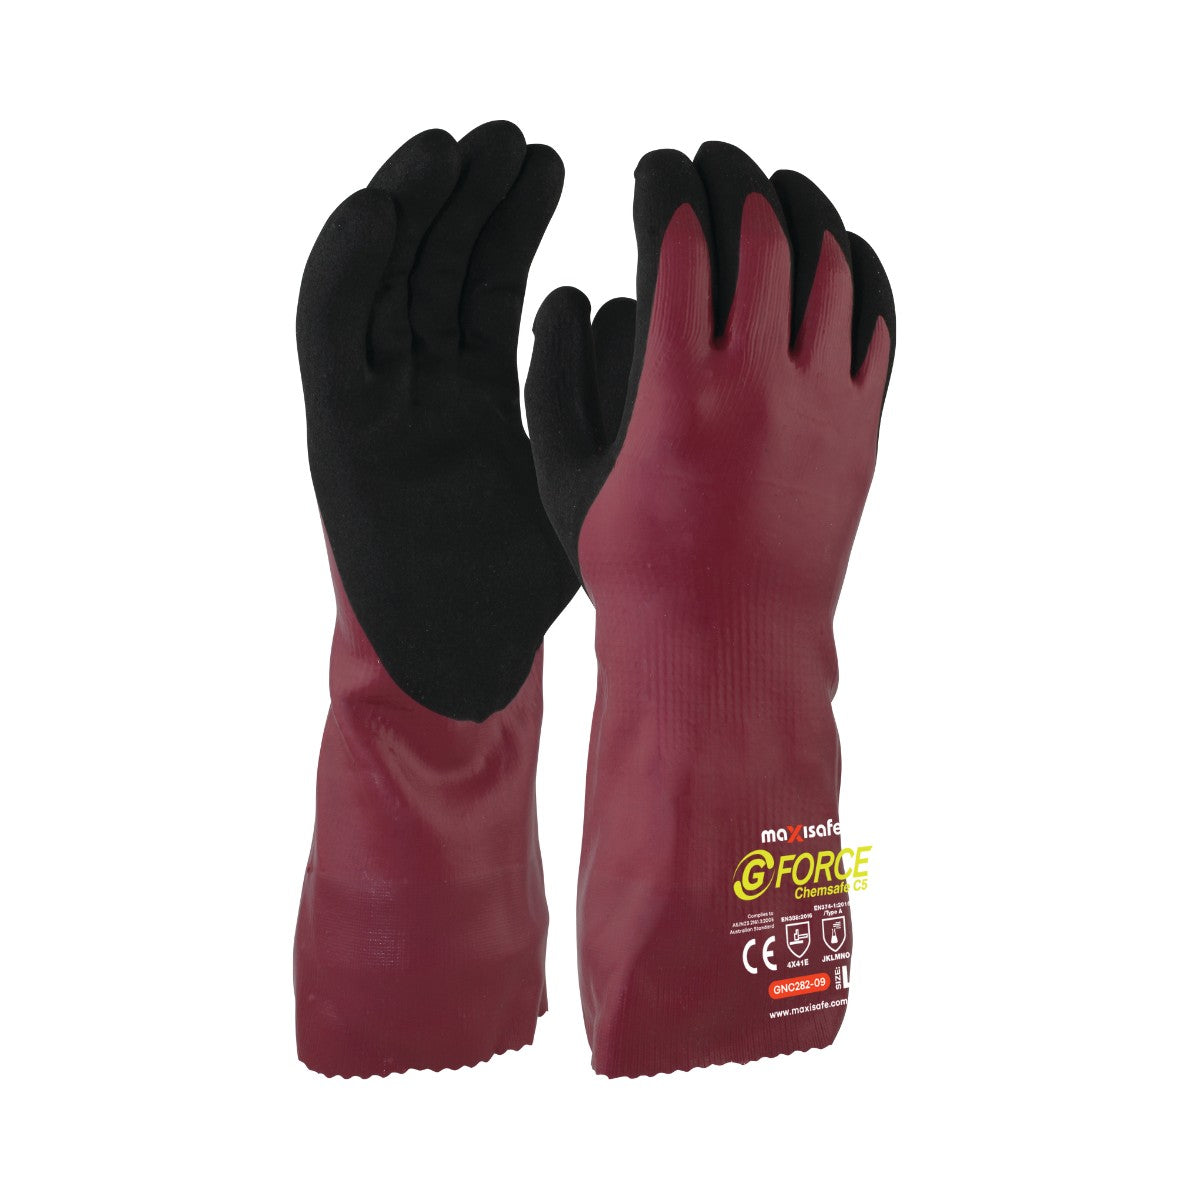 Maxisafe G-Force Chemsafe Cut E Glove GNC282 (Pack of 12 Pairs)